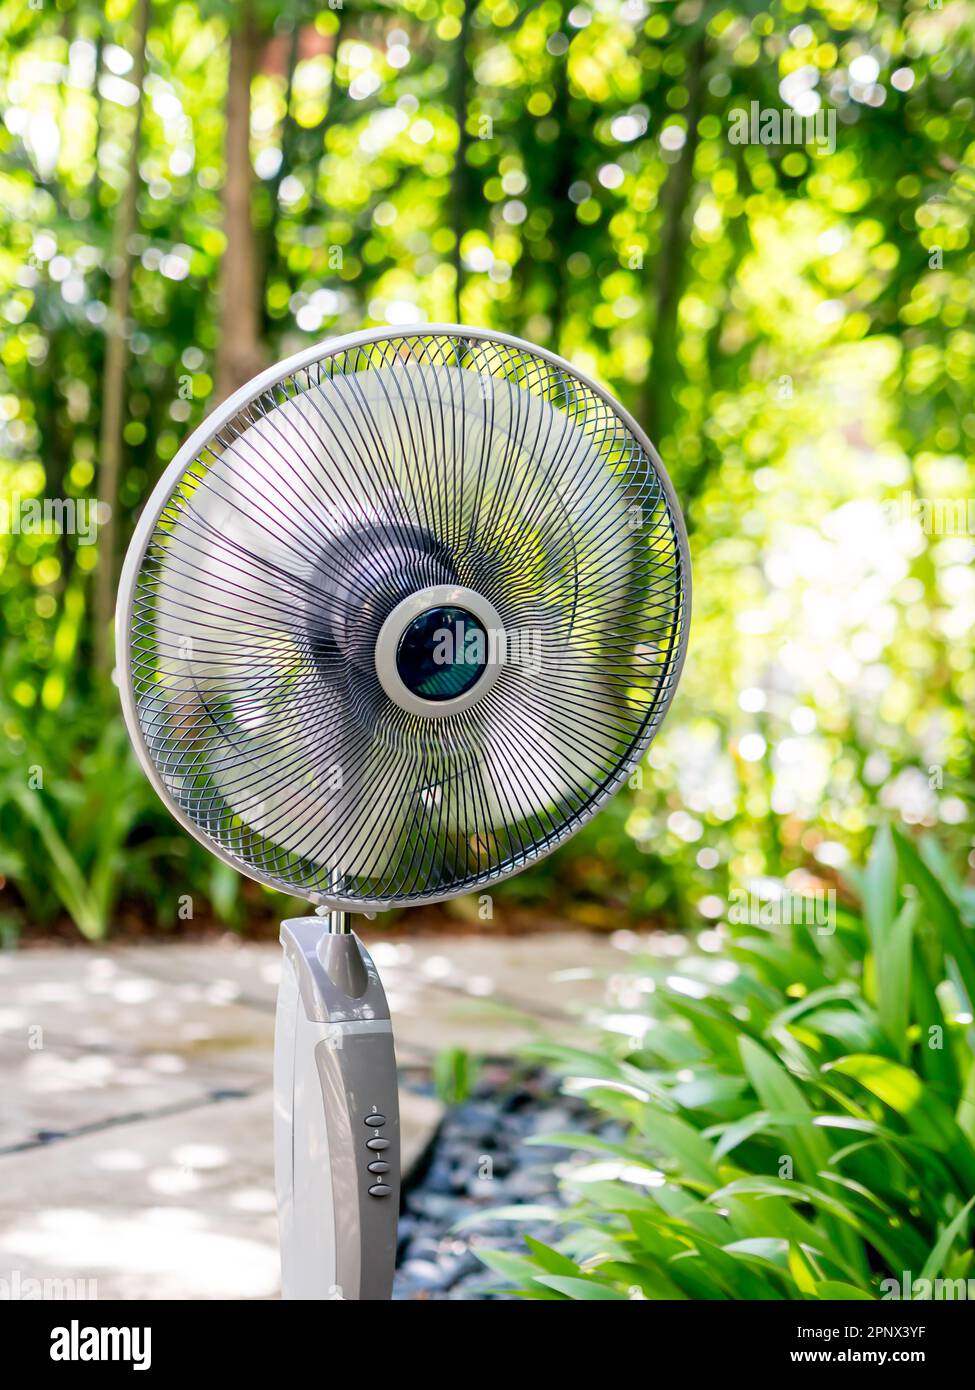 The  electric table fan in the garden Stock Photo